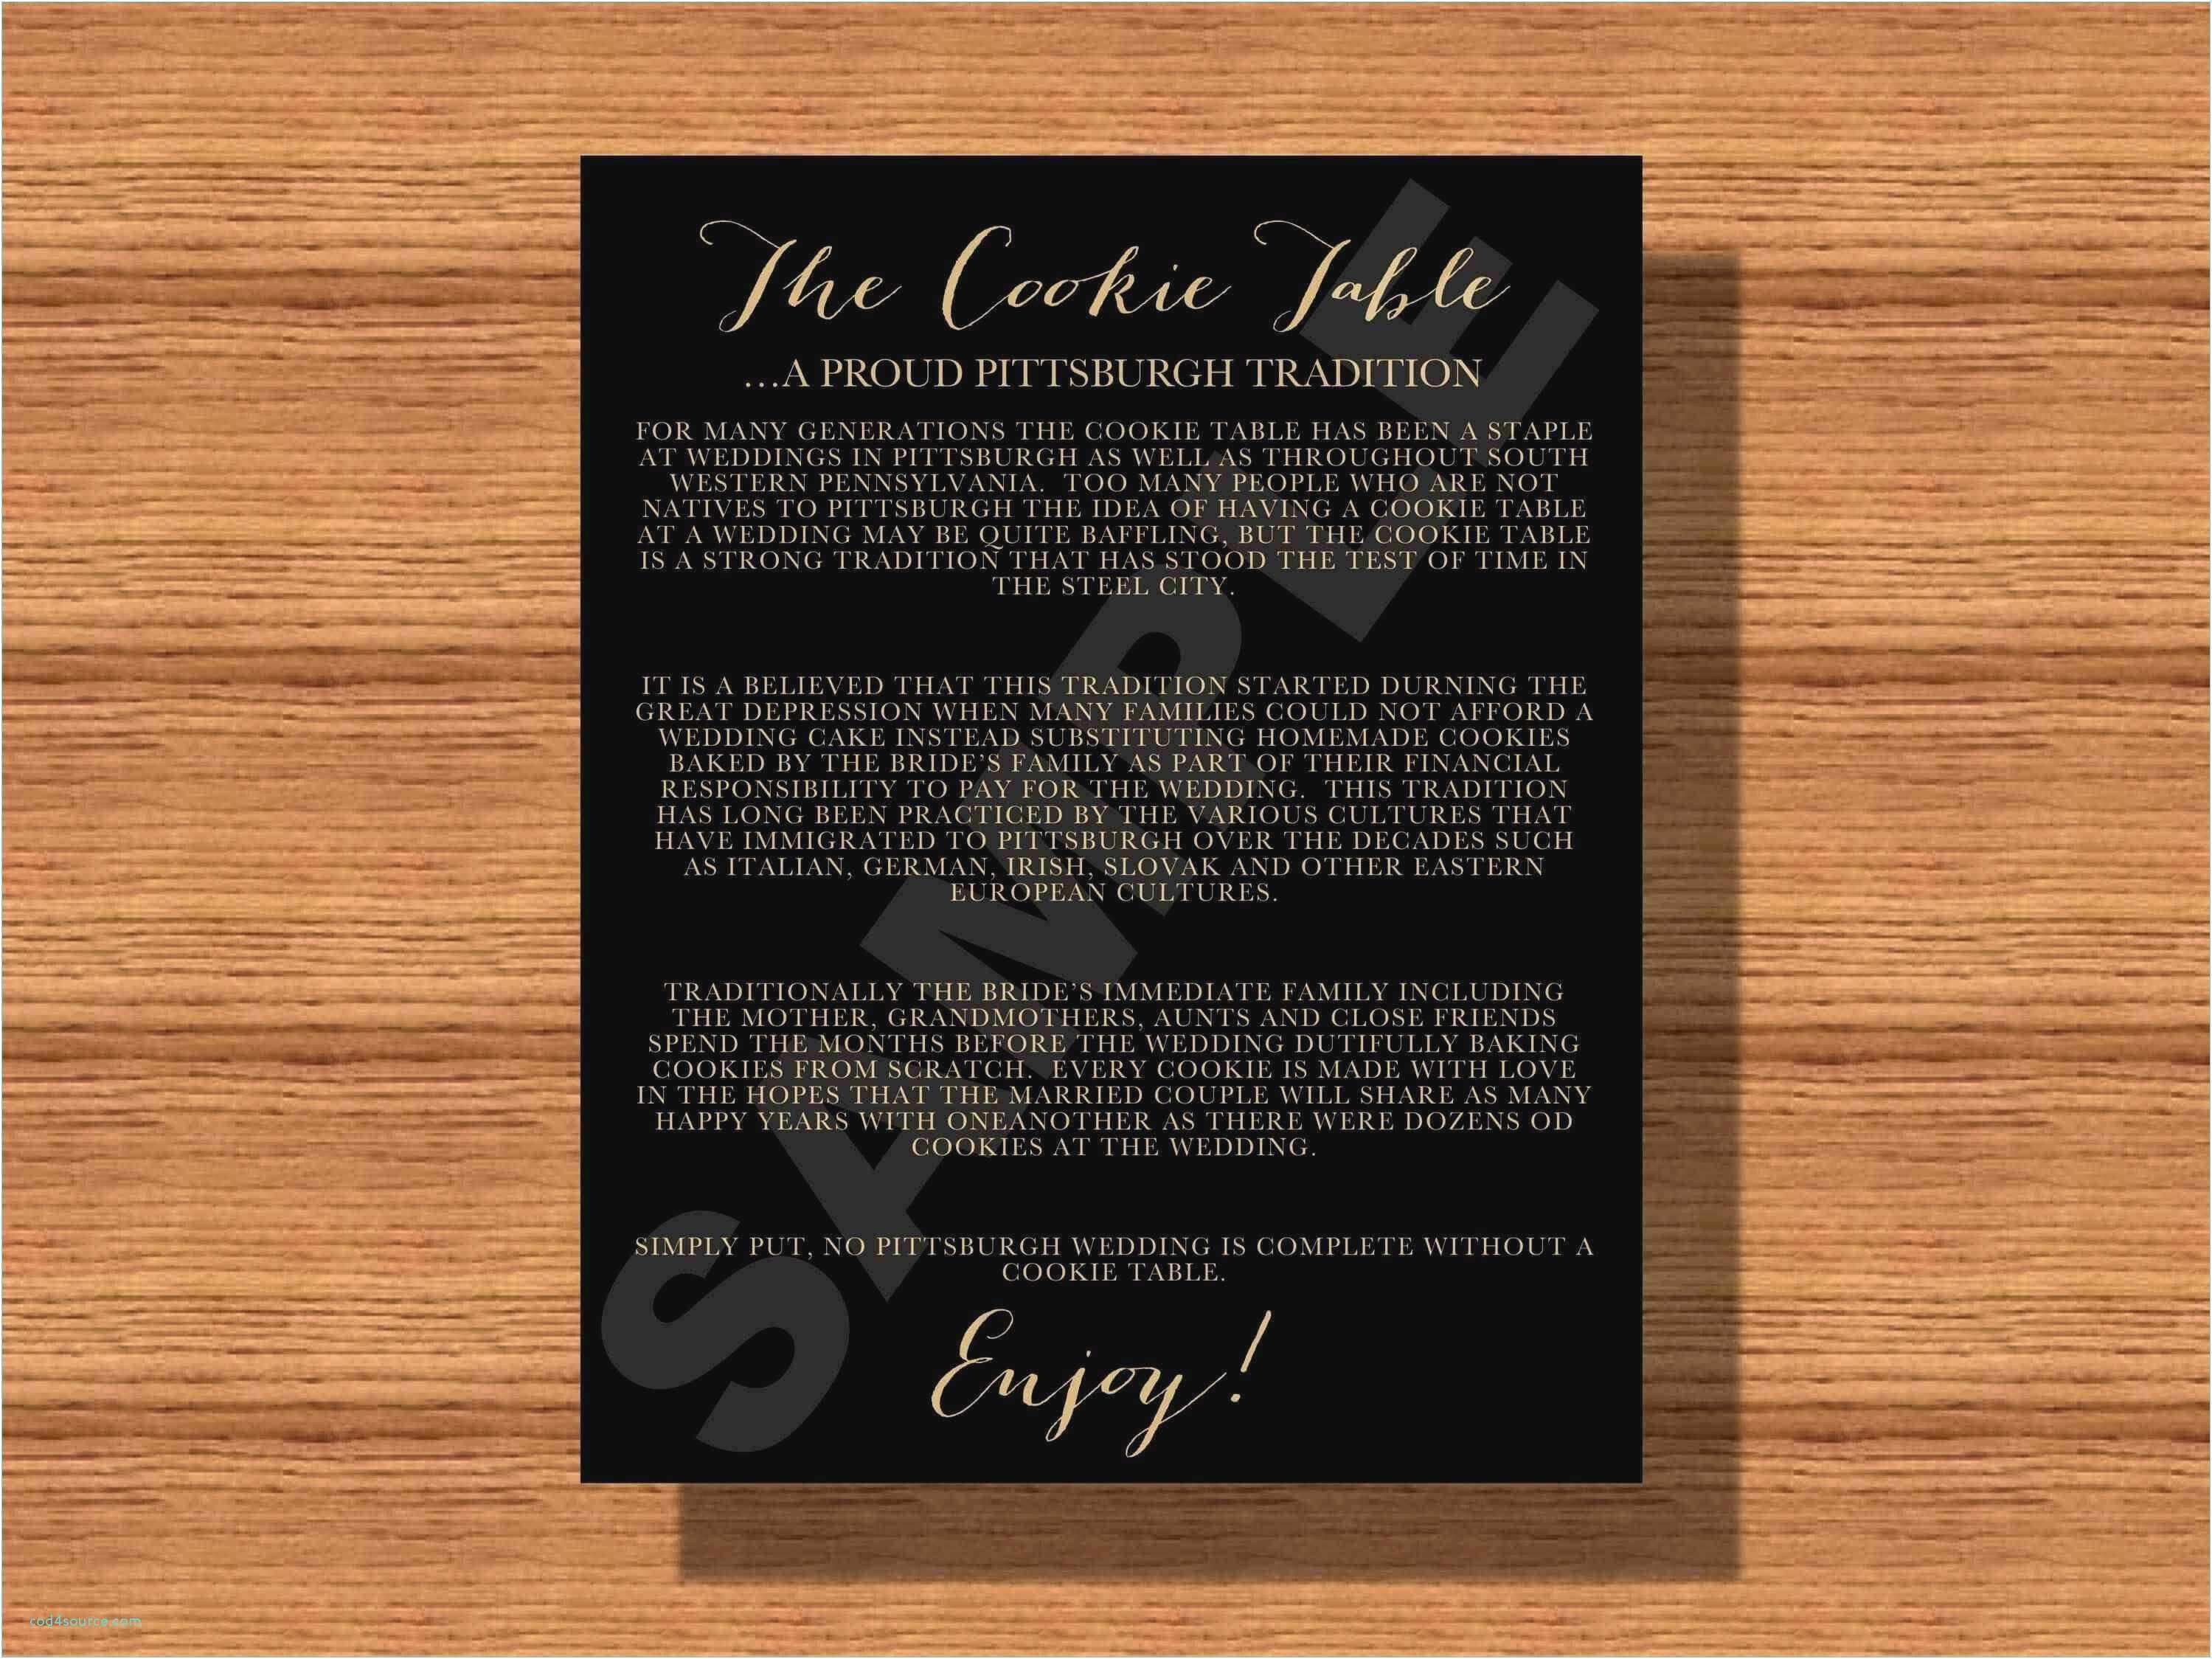 Free 57 Get Well Card Template 2019 | Free Professional With Get Out Of Jail Free Card Template